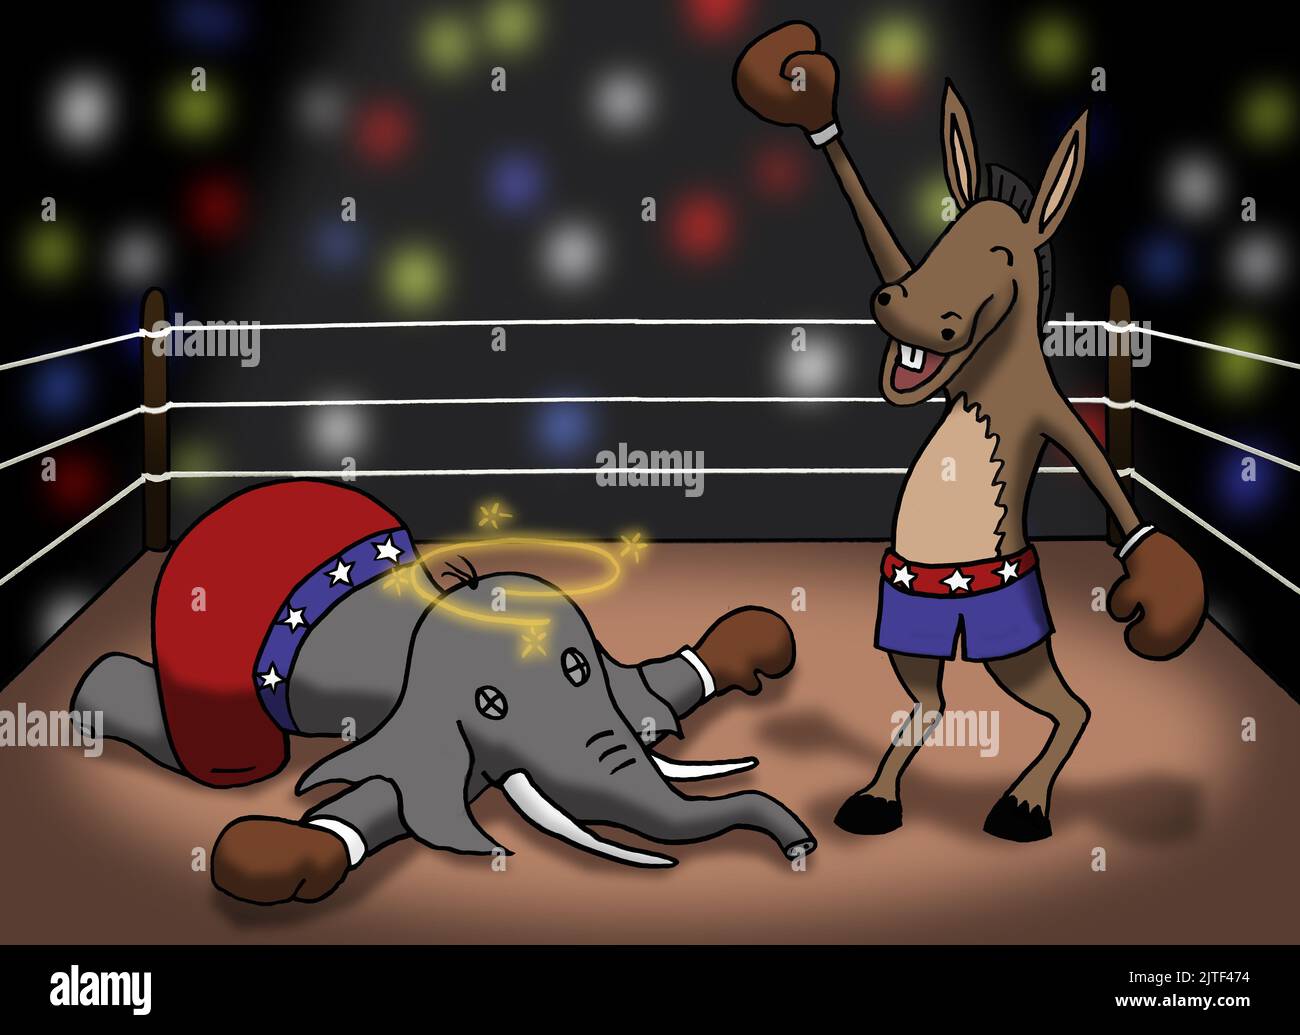 The Democrat Donkey stands in victory over the Republican Elephant in a boxing ring.  United States political cartoon. Stock Photo